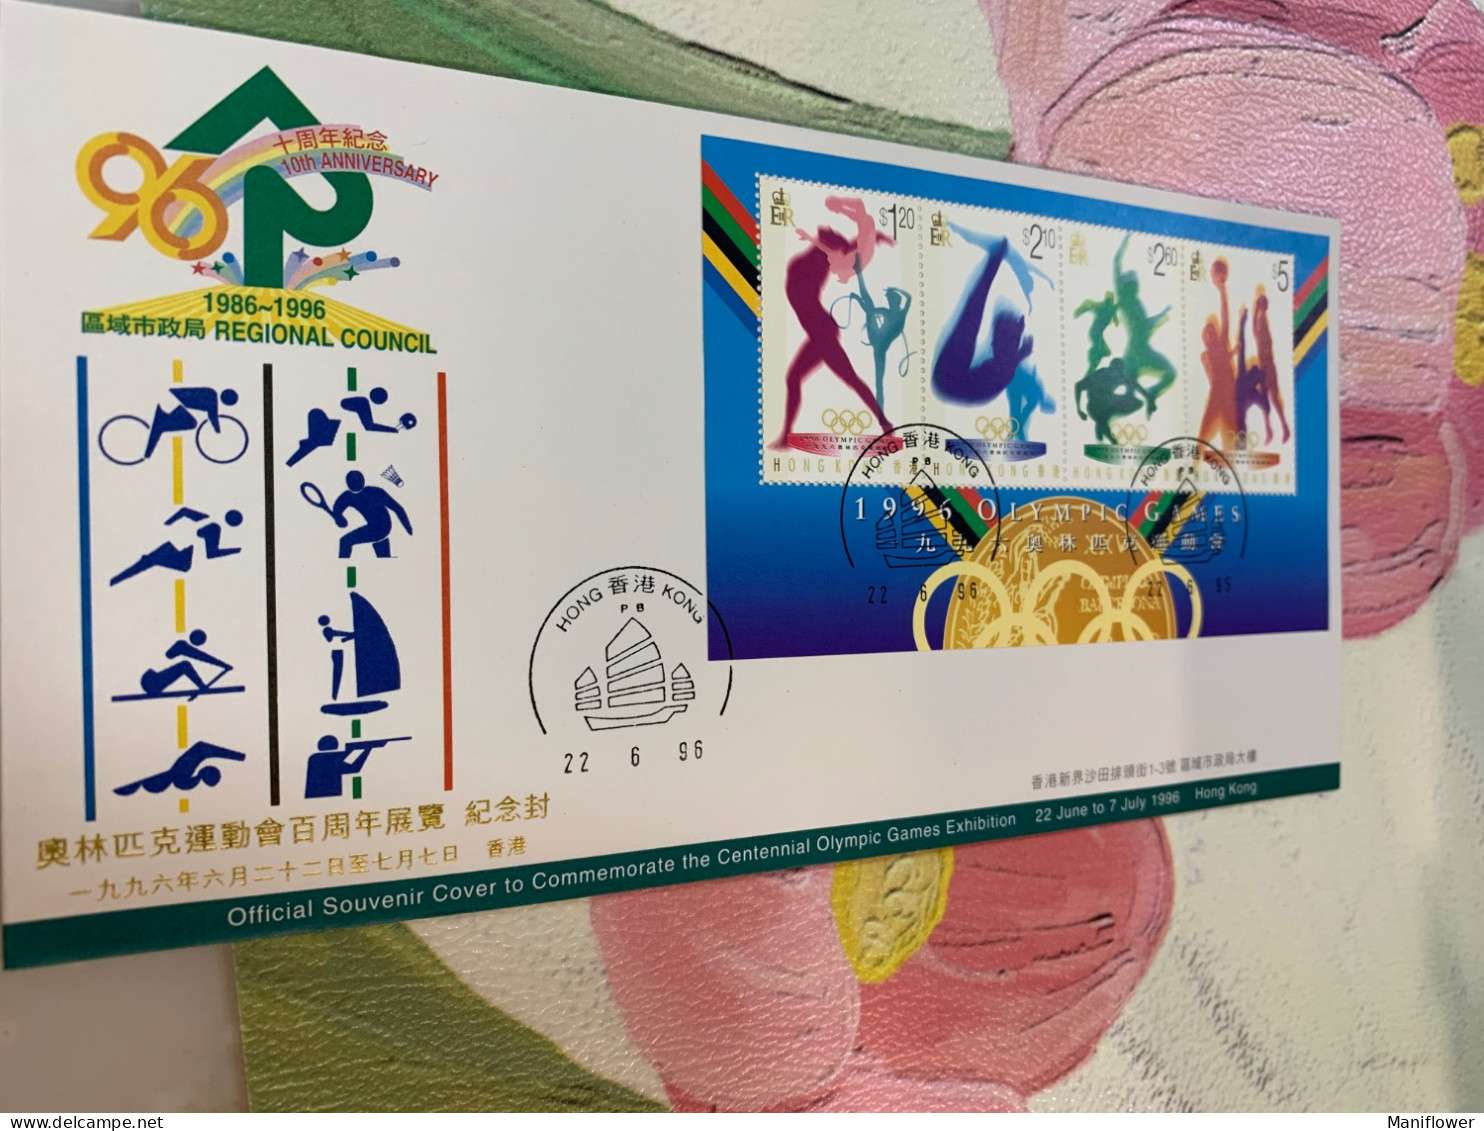 Hong Kong Stamp Olympic Exhibitions FDC Rare Table Tennis Basketball - Covers & Documents